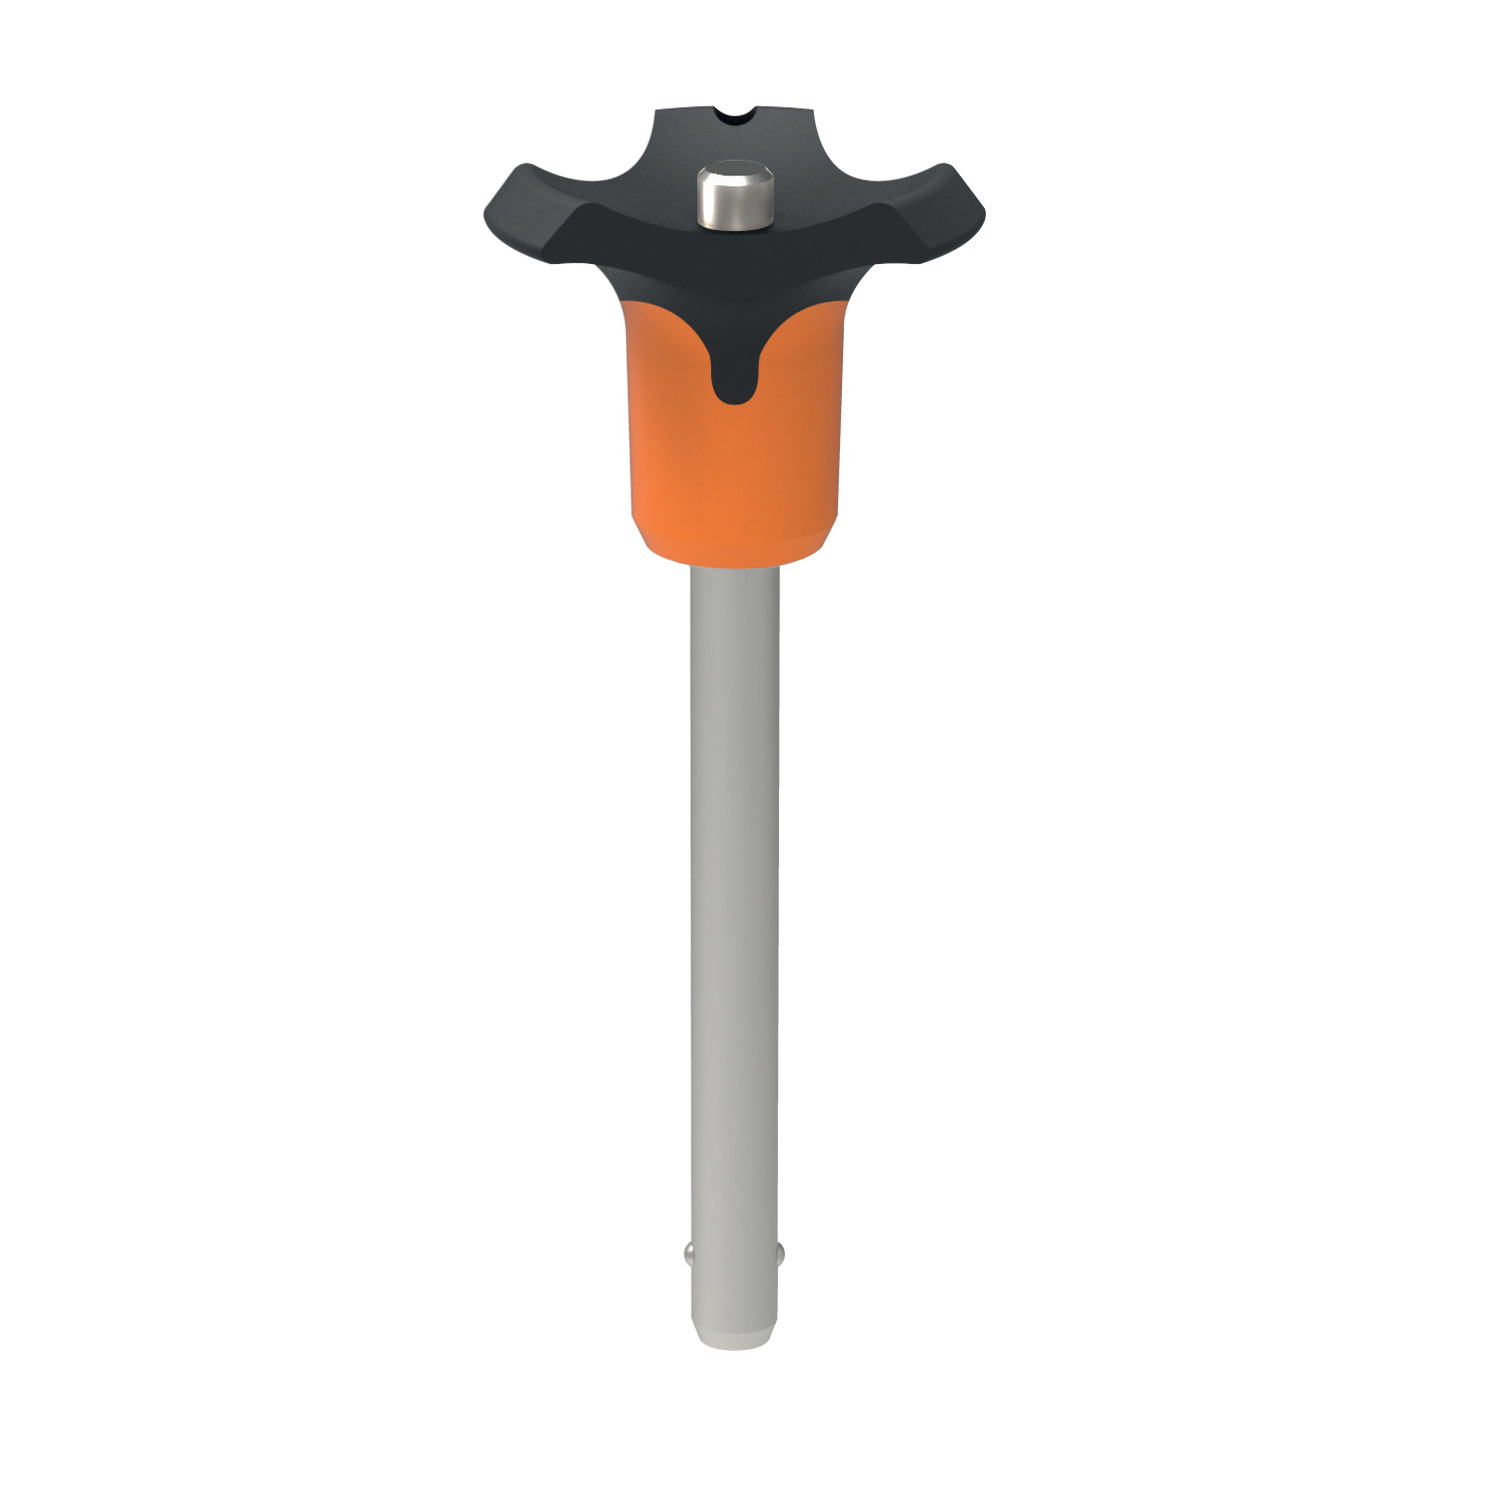 Ball Lock Pins - Single Acting - Orange Plastic Handle Single Acting Plastic Handle Ball Lock Pins in four different colours (orange, blue, grey and black) to co-ordinate with your required application colour scheme. For repeated connection of parts, with high shear forces.